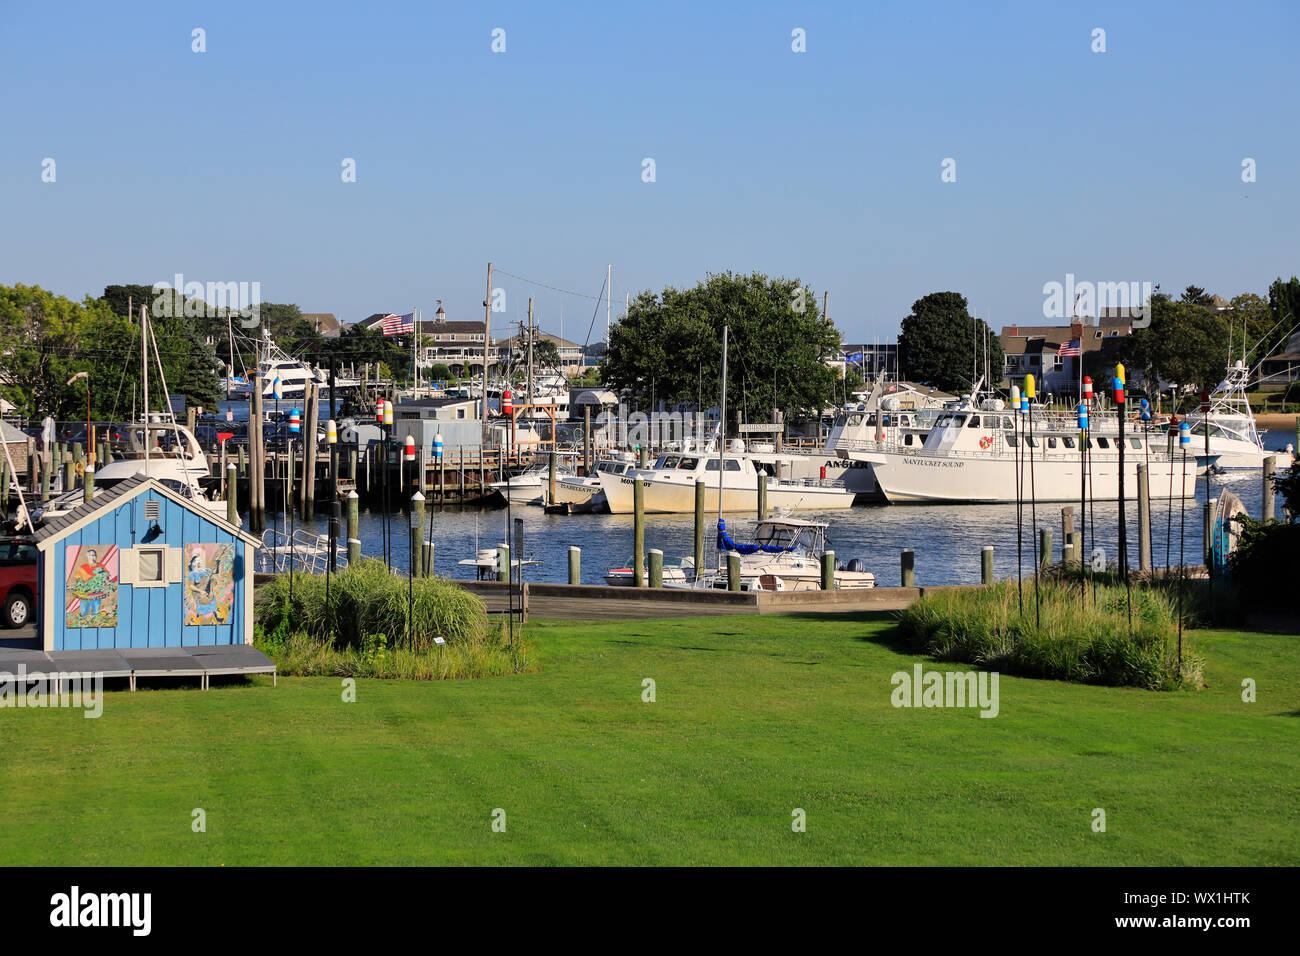 The view of Hyannis harbor with a green grass field in foreground.Hyannis.Massachusetts.USA Stock Photo